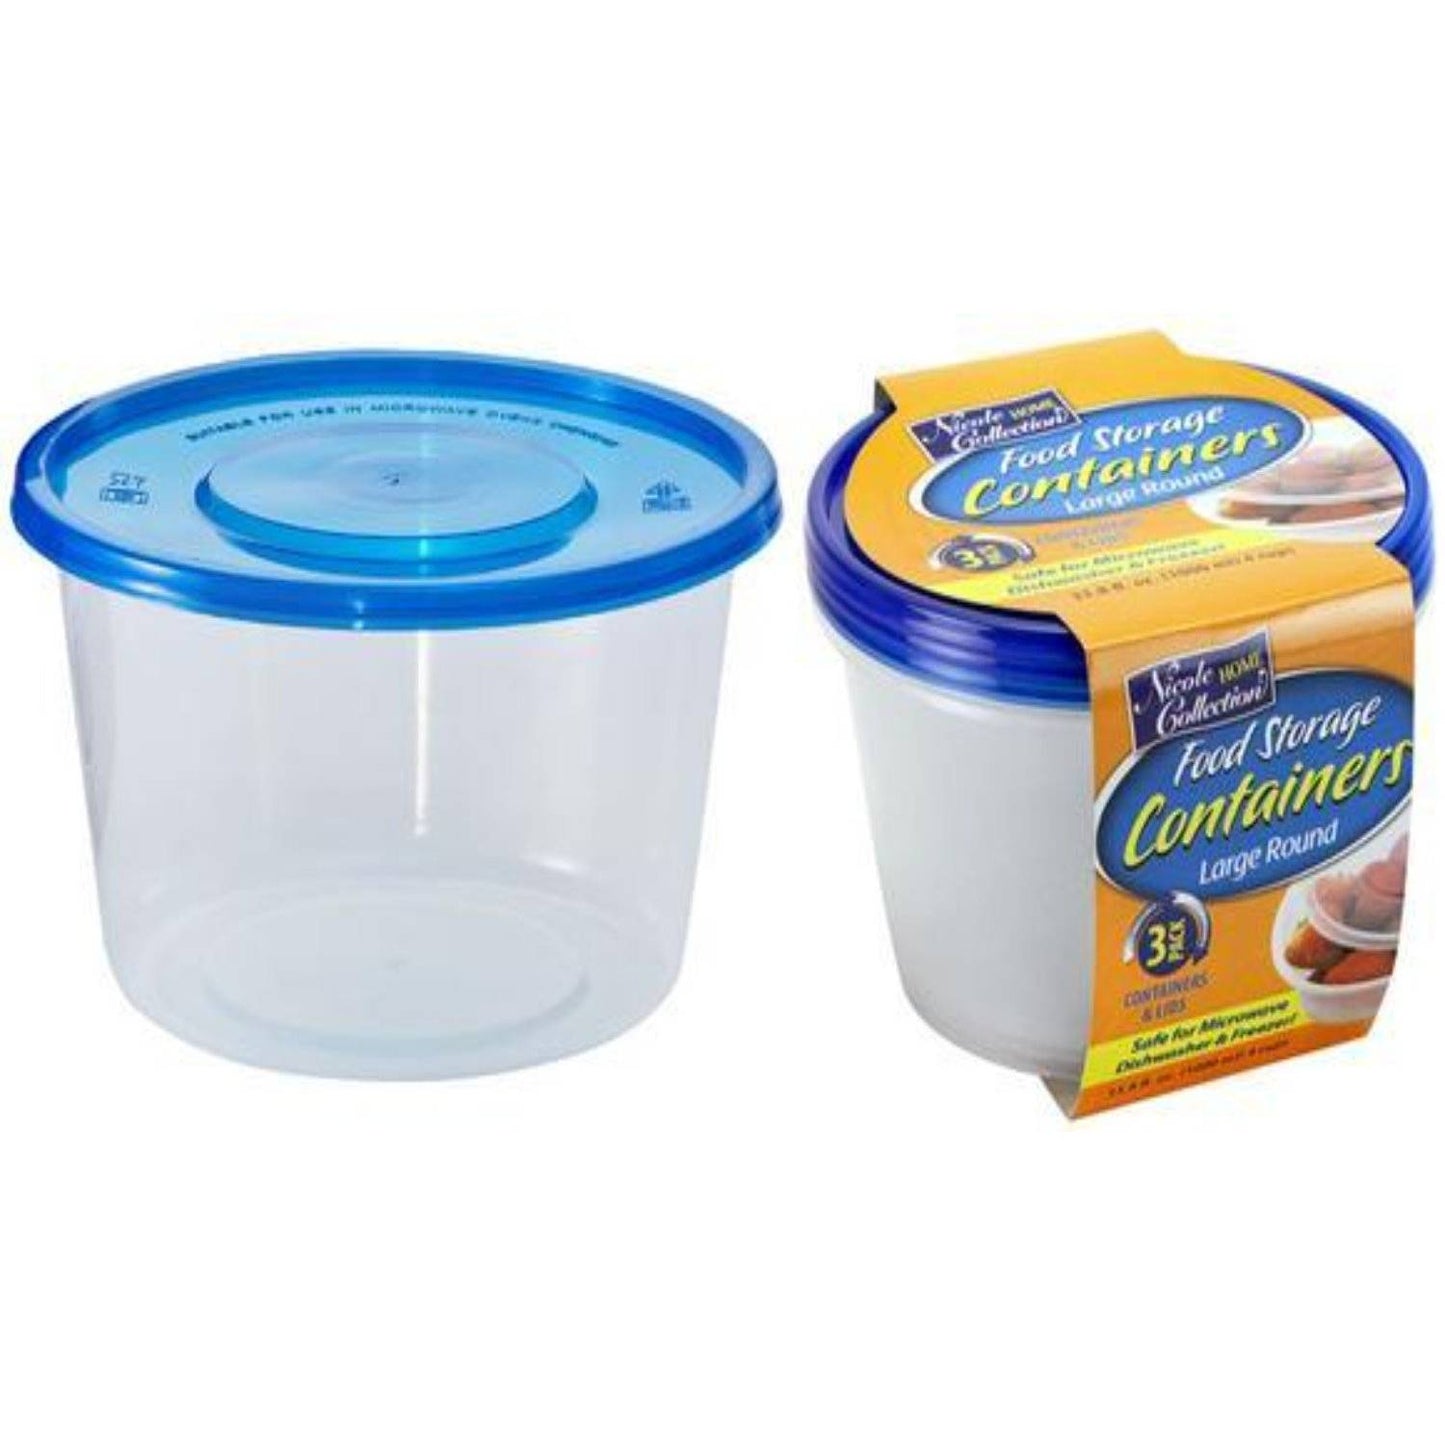 Ziploc Containers & Lids, Large Round